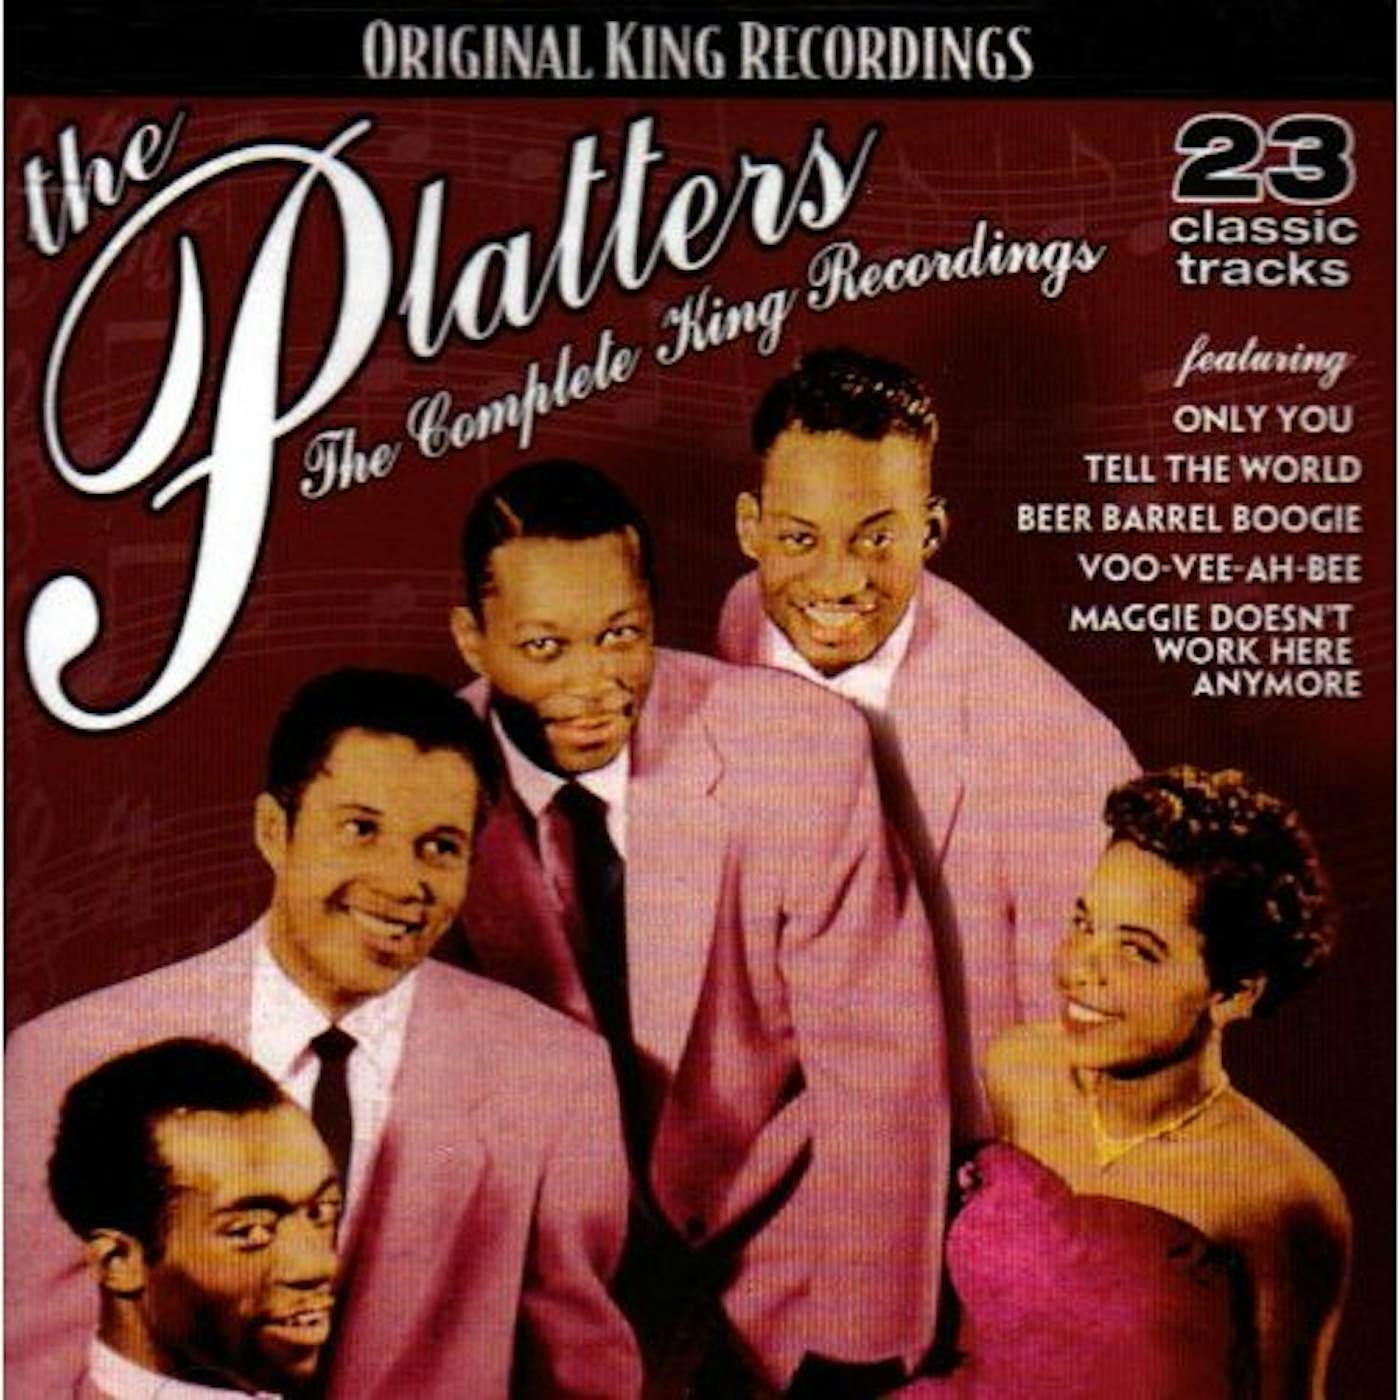 The Platters COMPLETE KING RECORDINGS CD